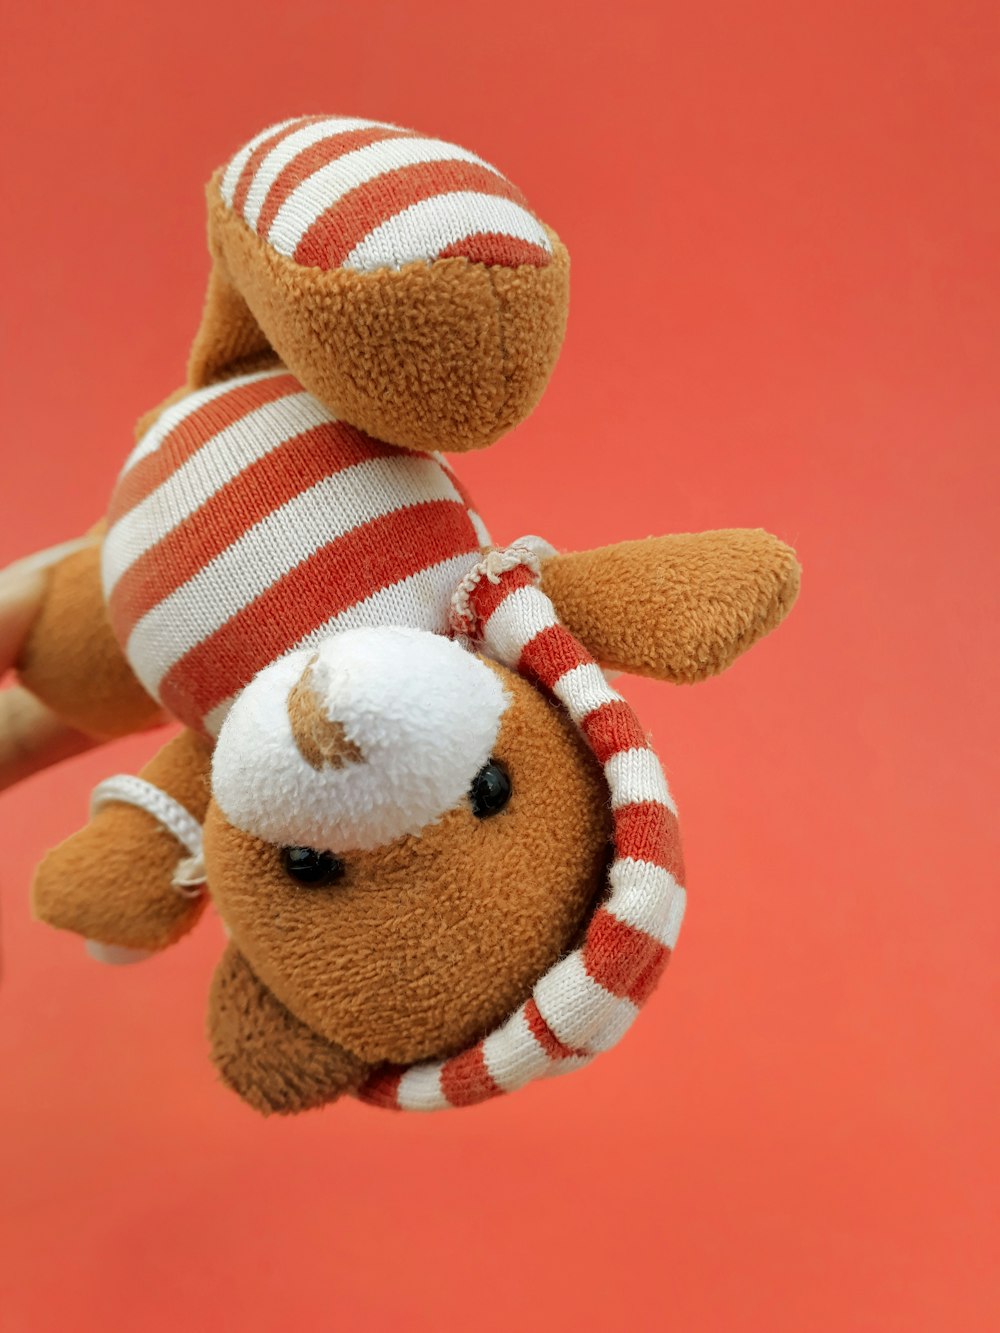 a brown teddy bear wearing a red and white striped hat